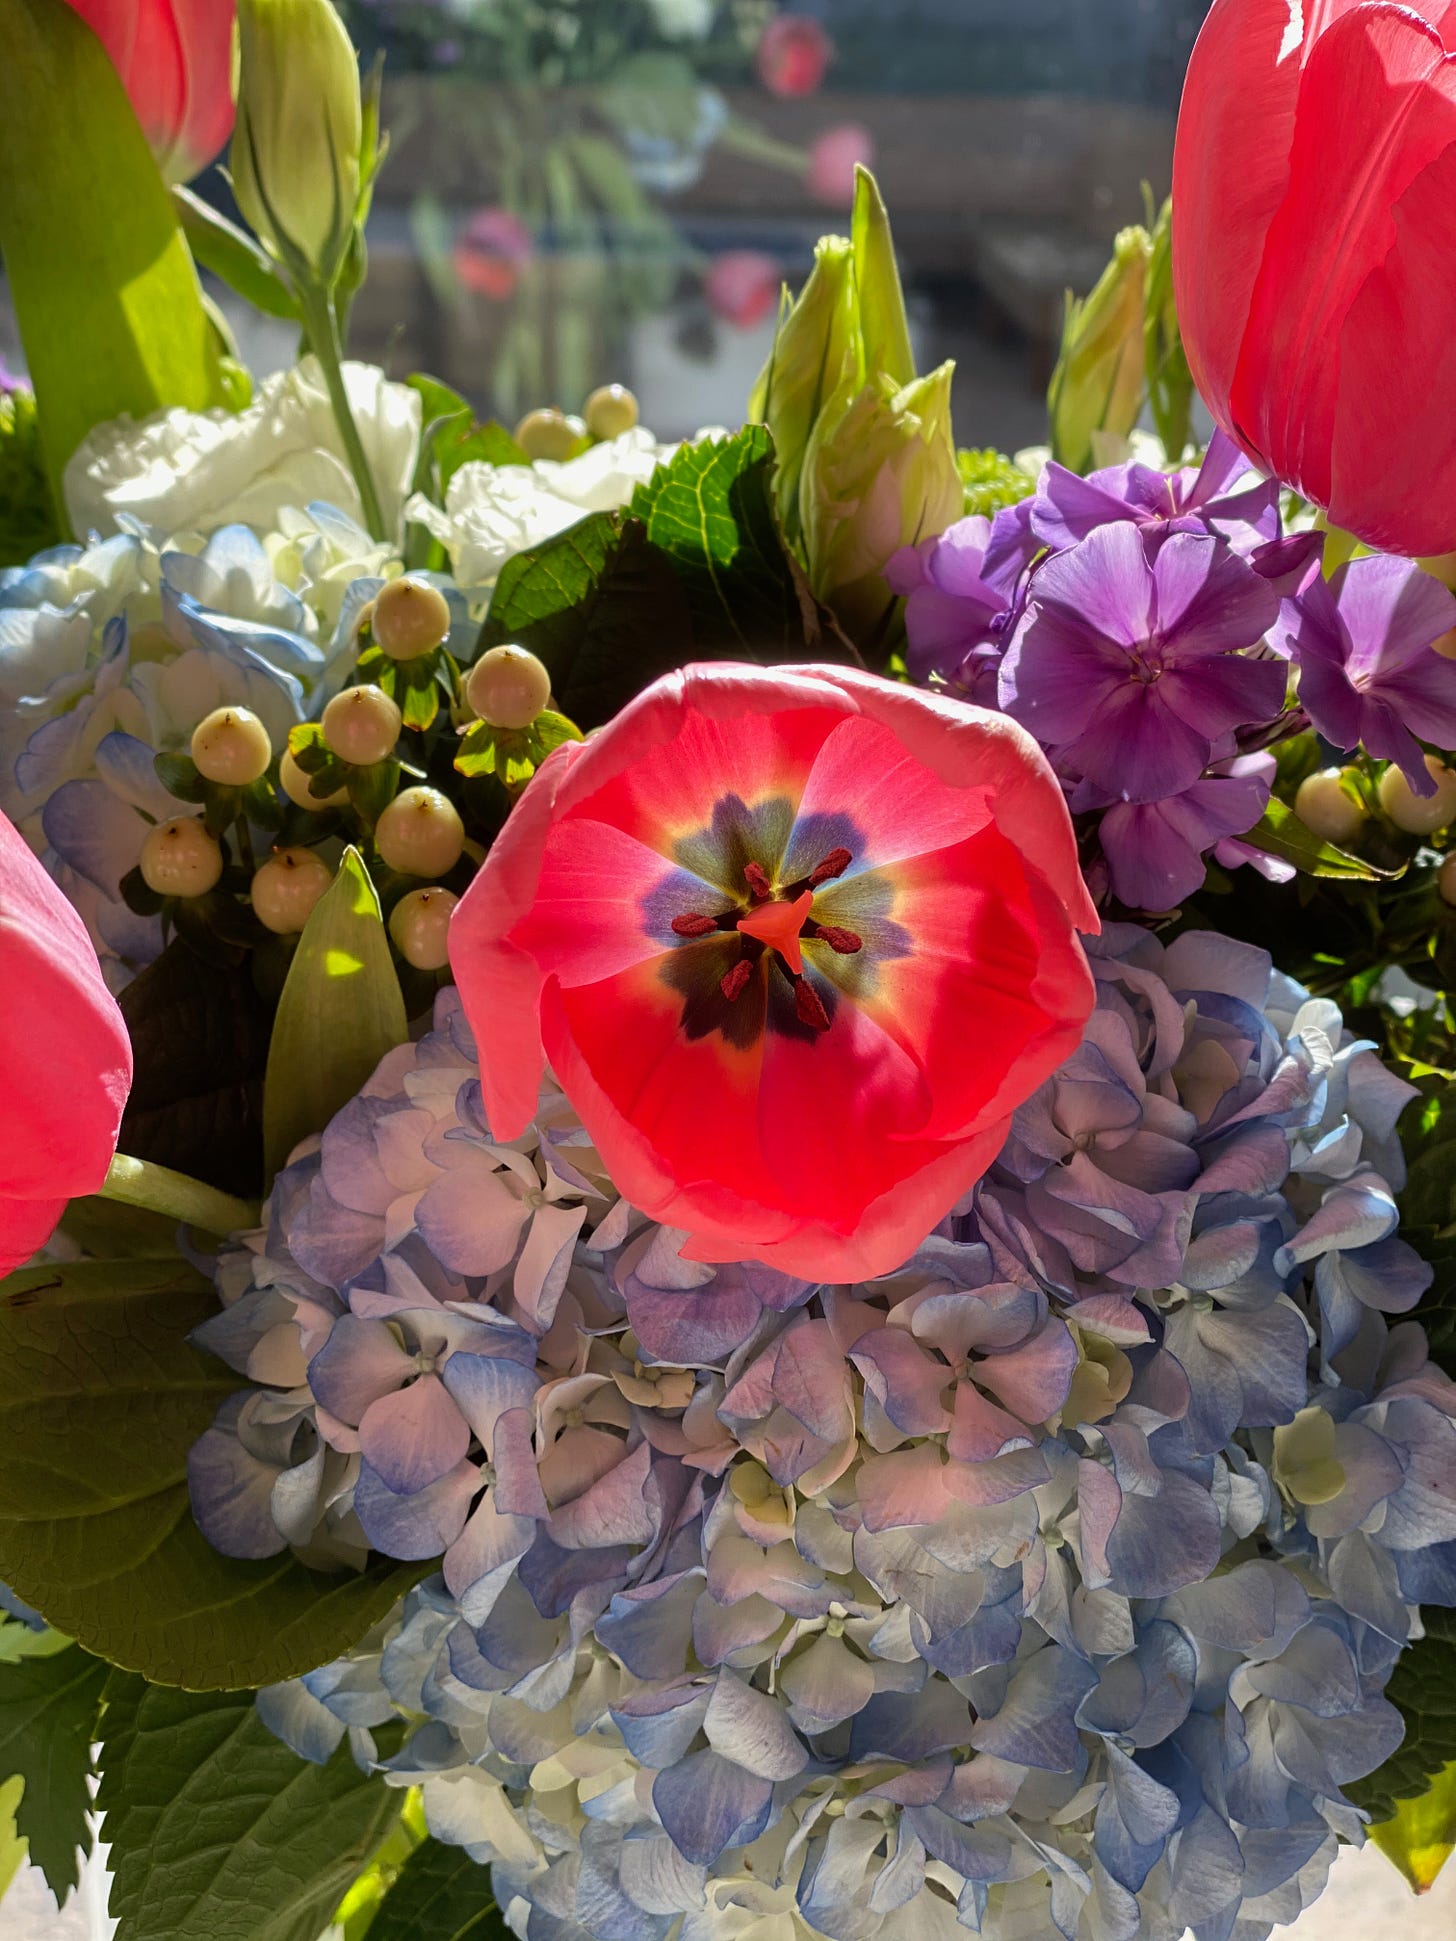 A bouquet of flowers, with a large pink one at the center.